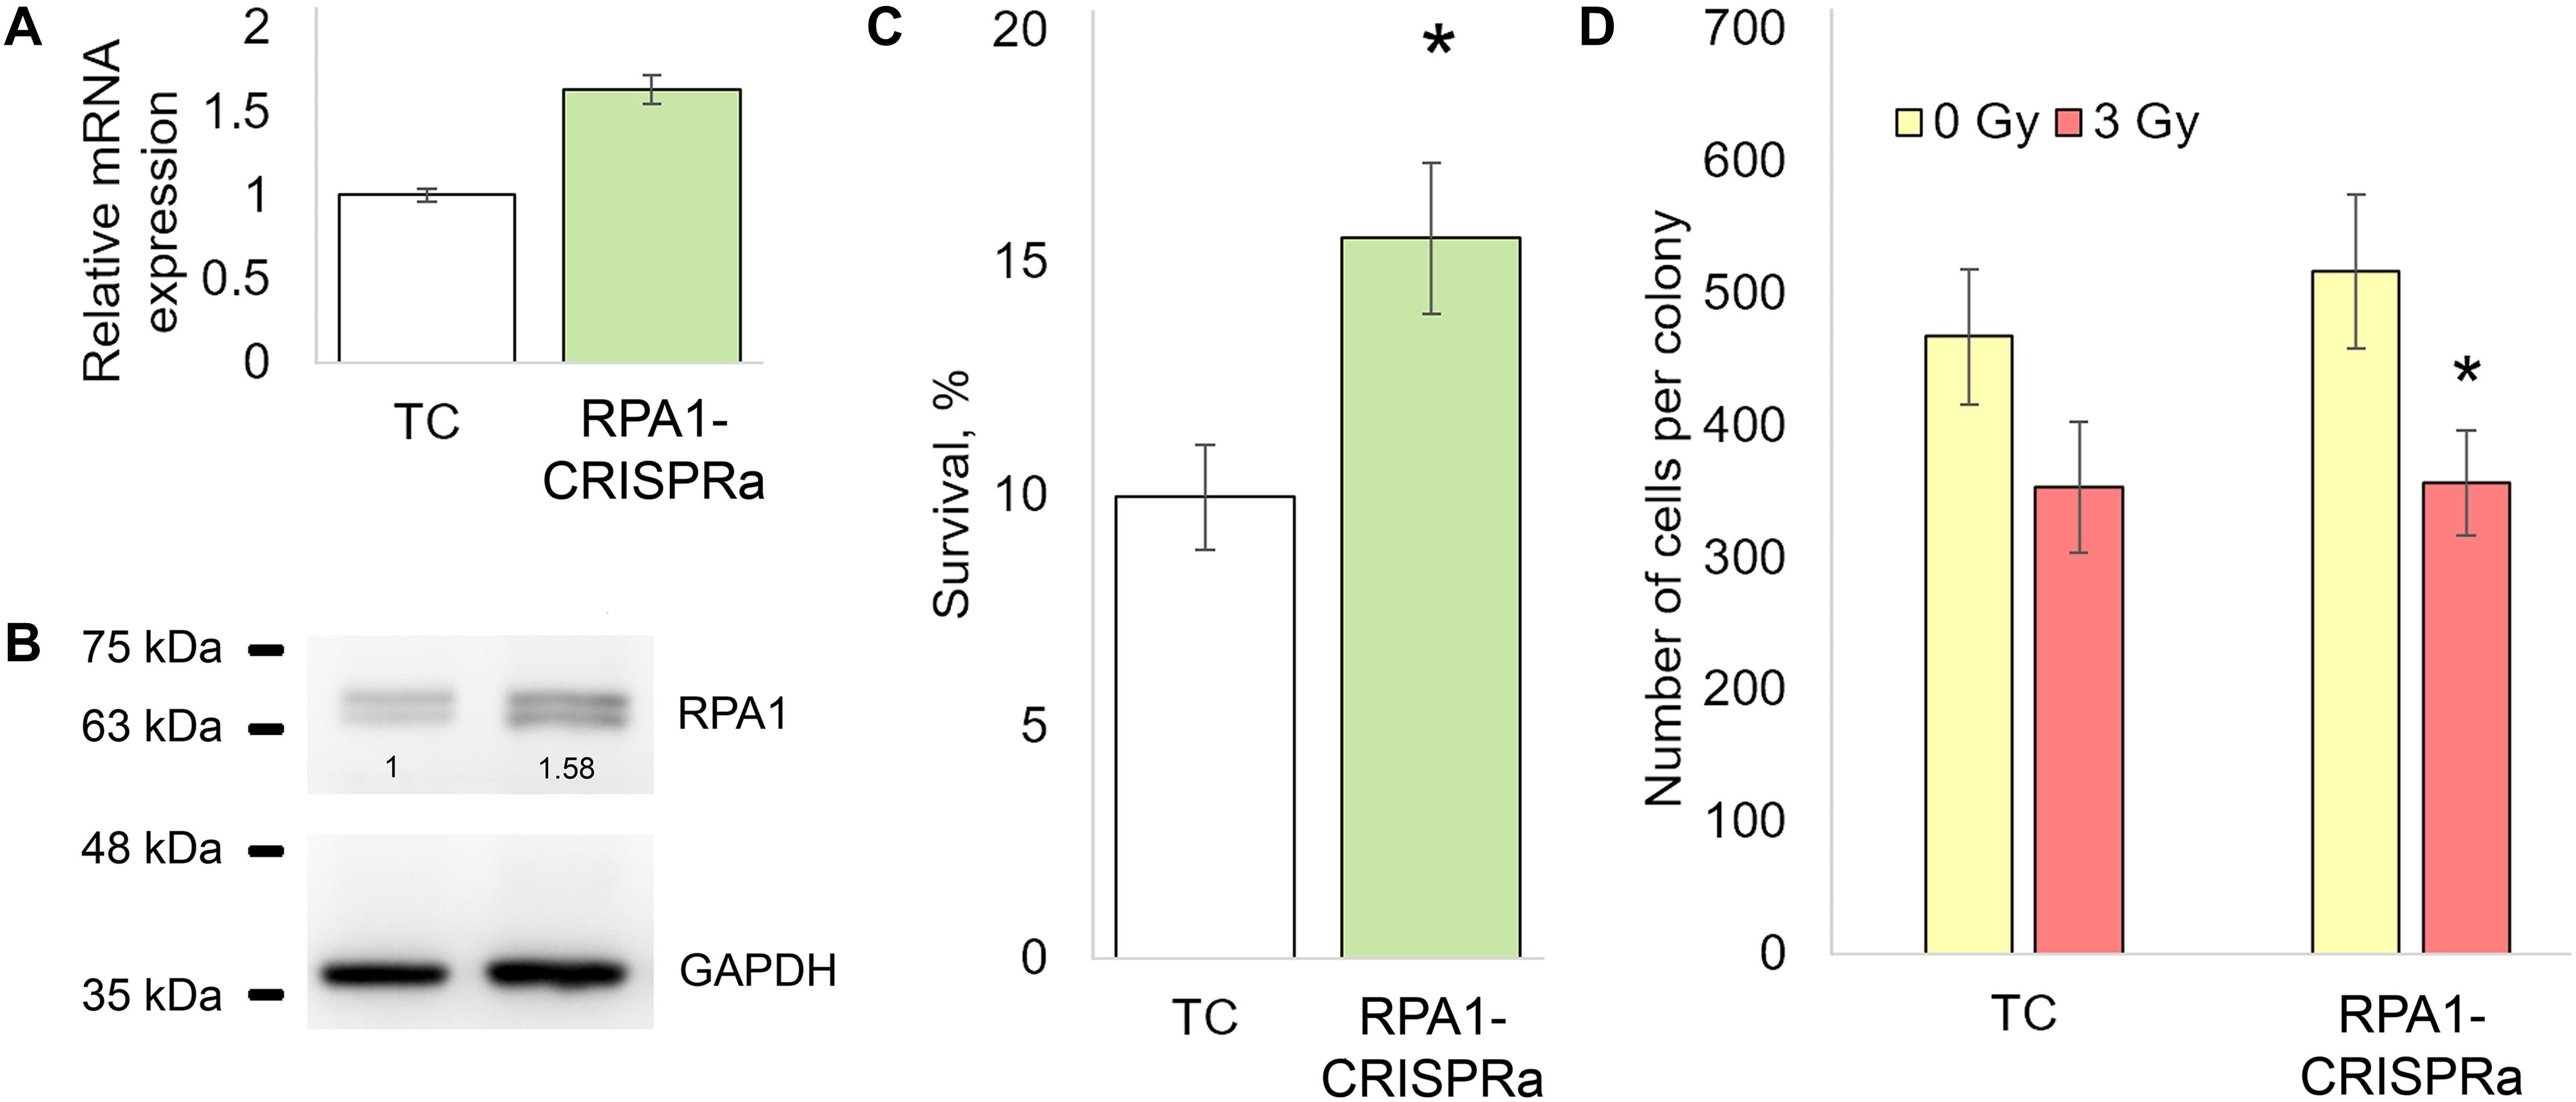 Frontiers Radioresistance Dna Damage And Dna Repair In Cells With Moderate Overexpression Of Rpa1 Genetics